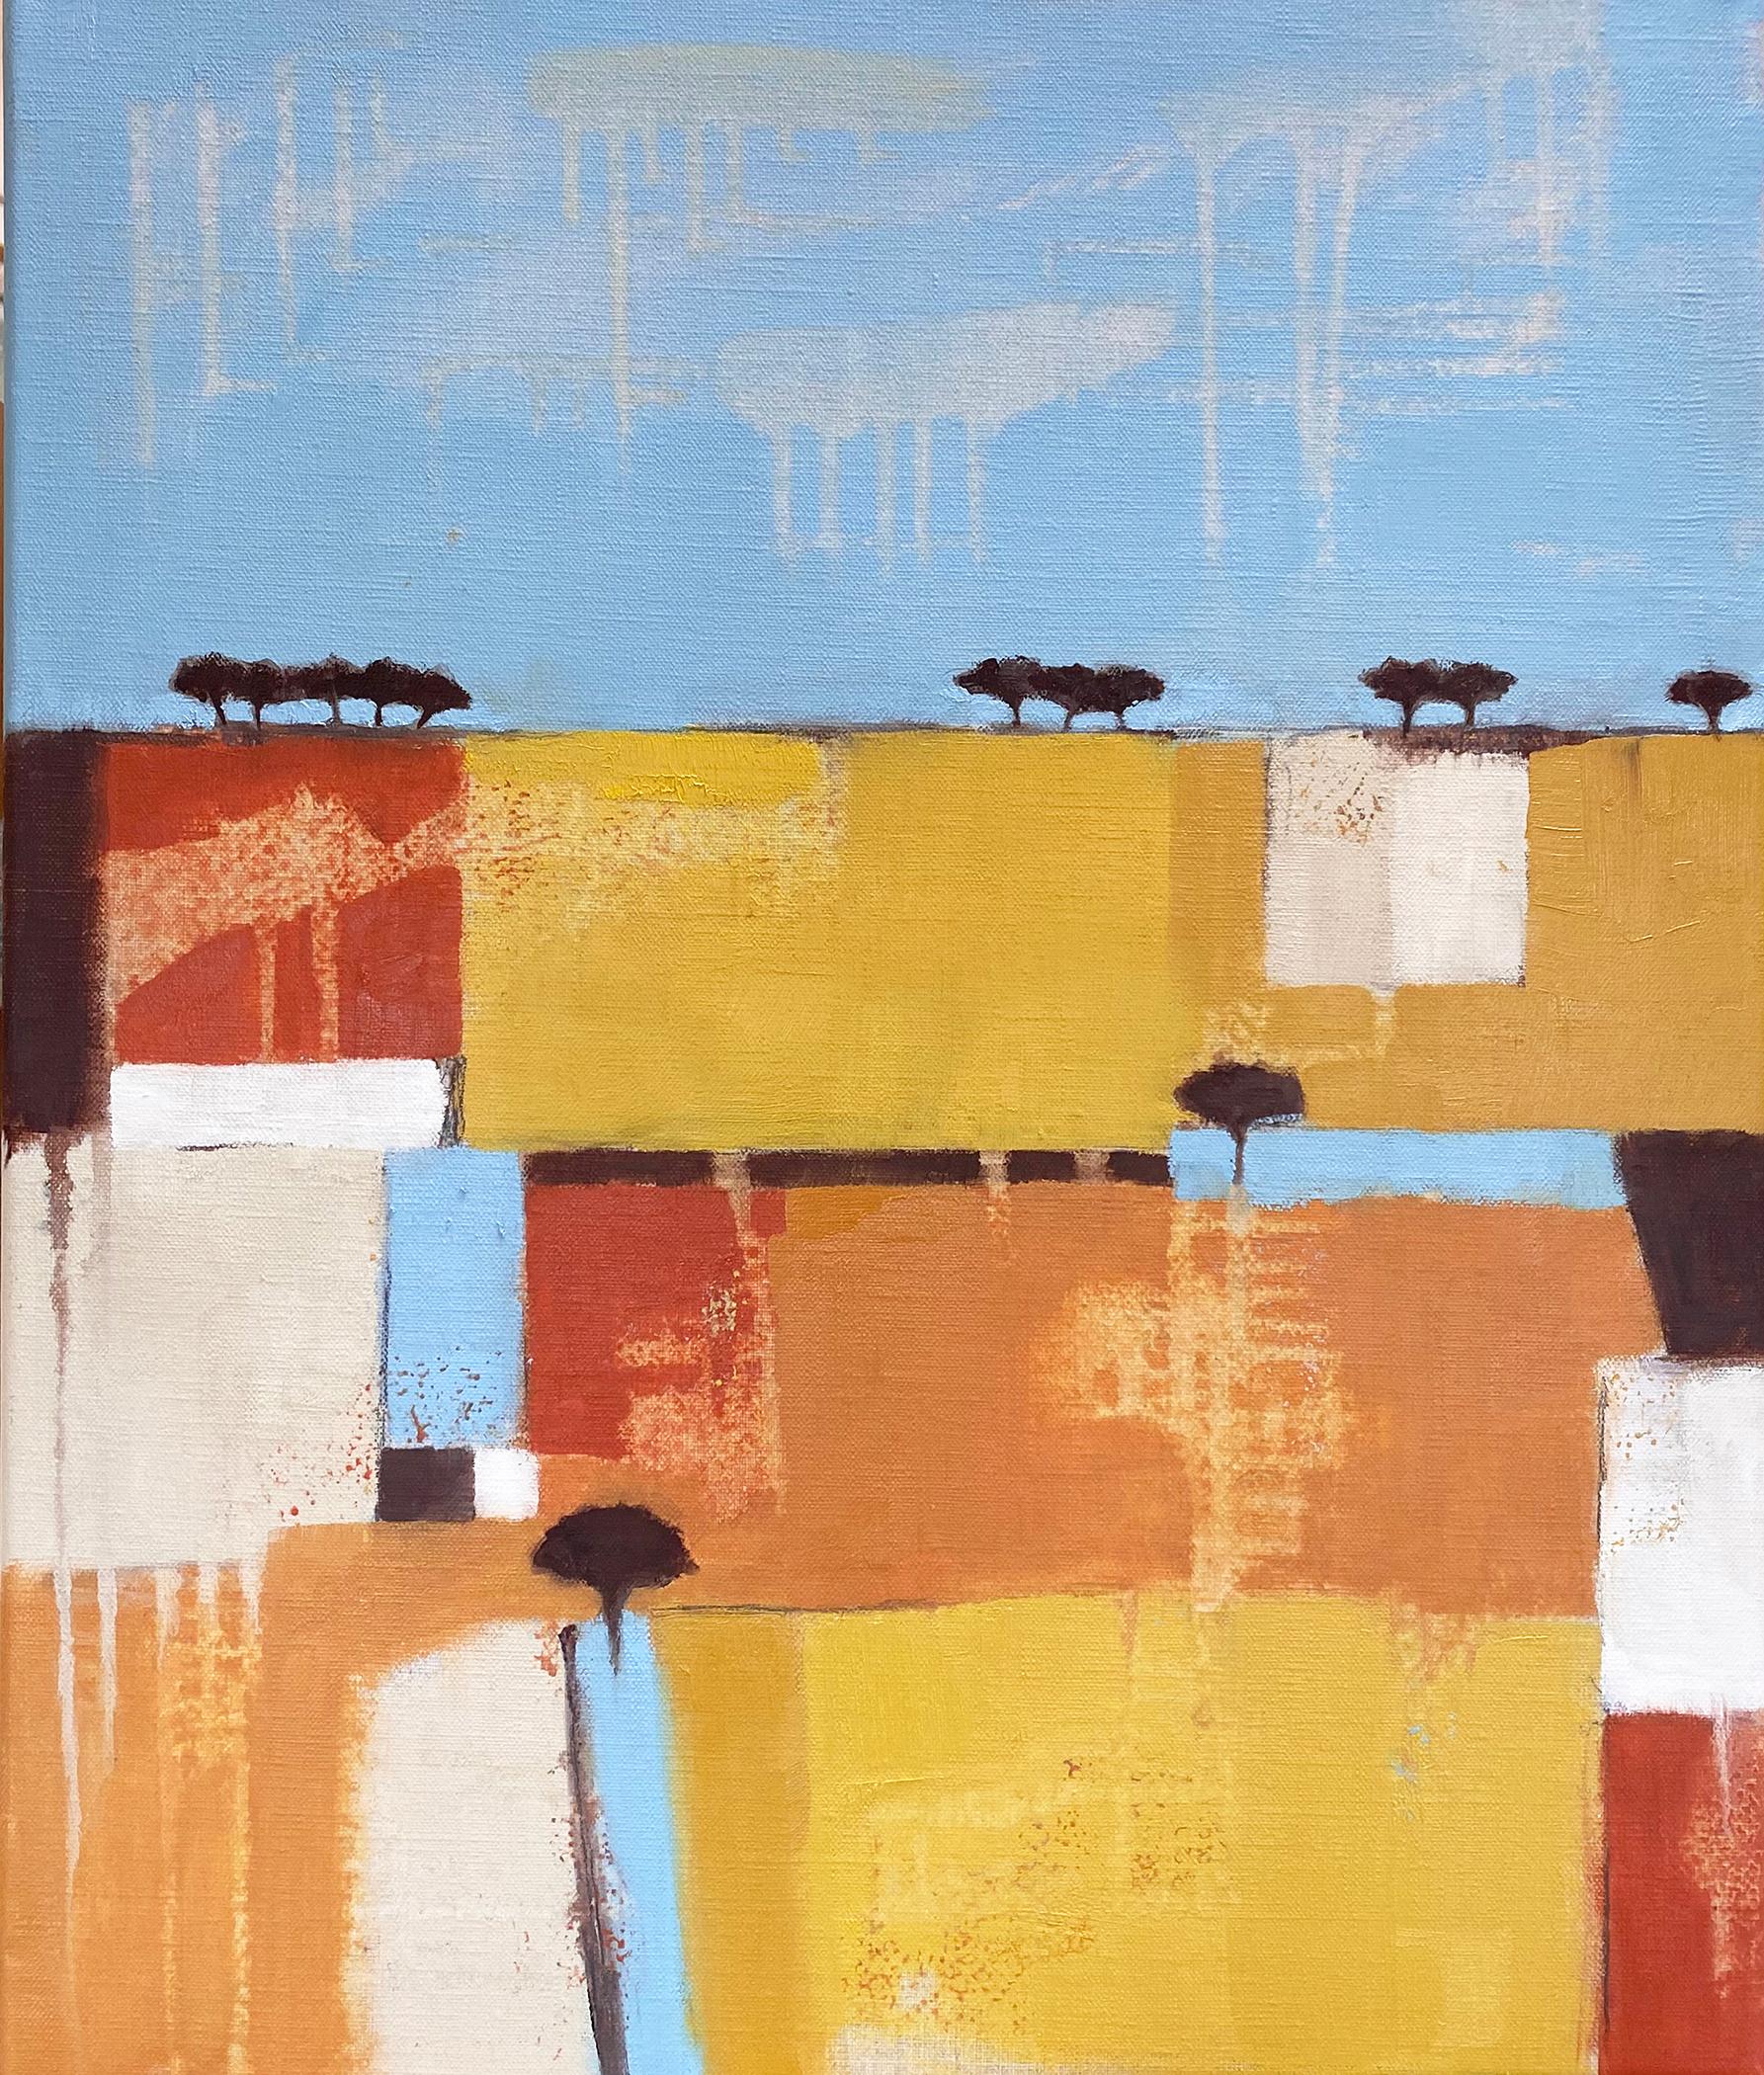 Ana Bianchi Abstract Painting - Hot Fields II, Original Painting, Contemporary Abstract art, Landscape, Nature